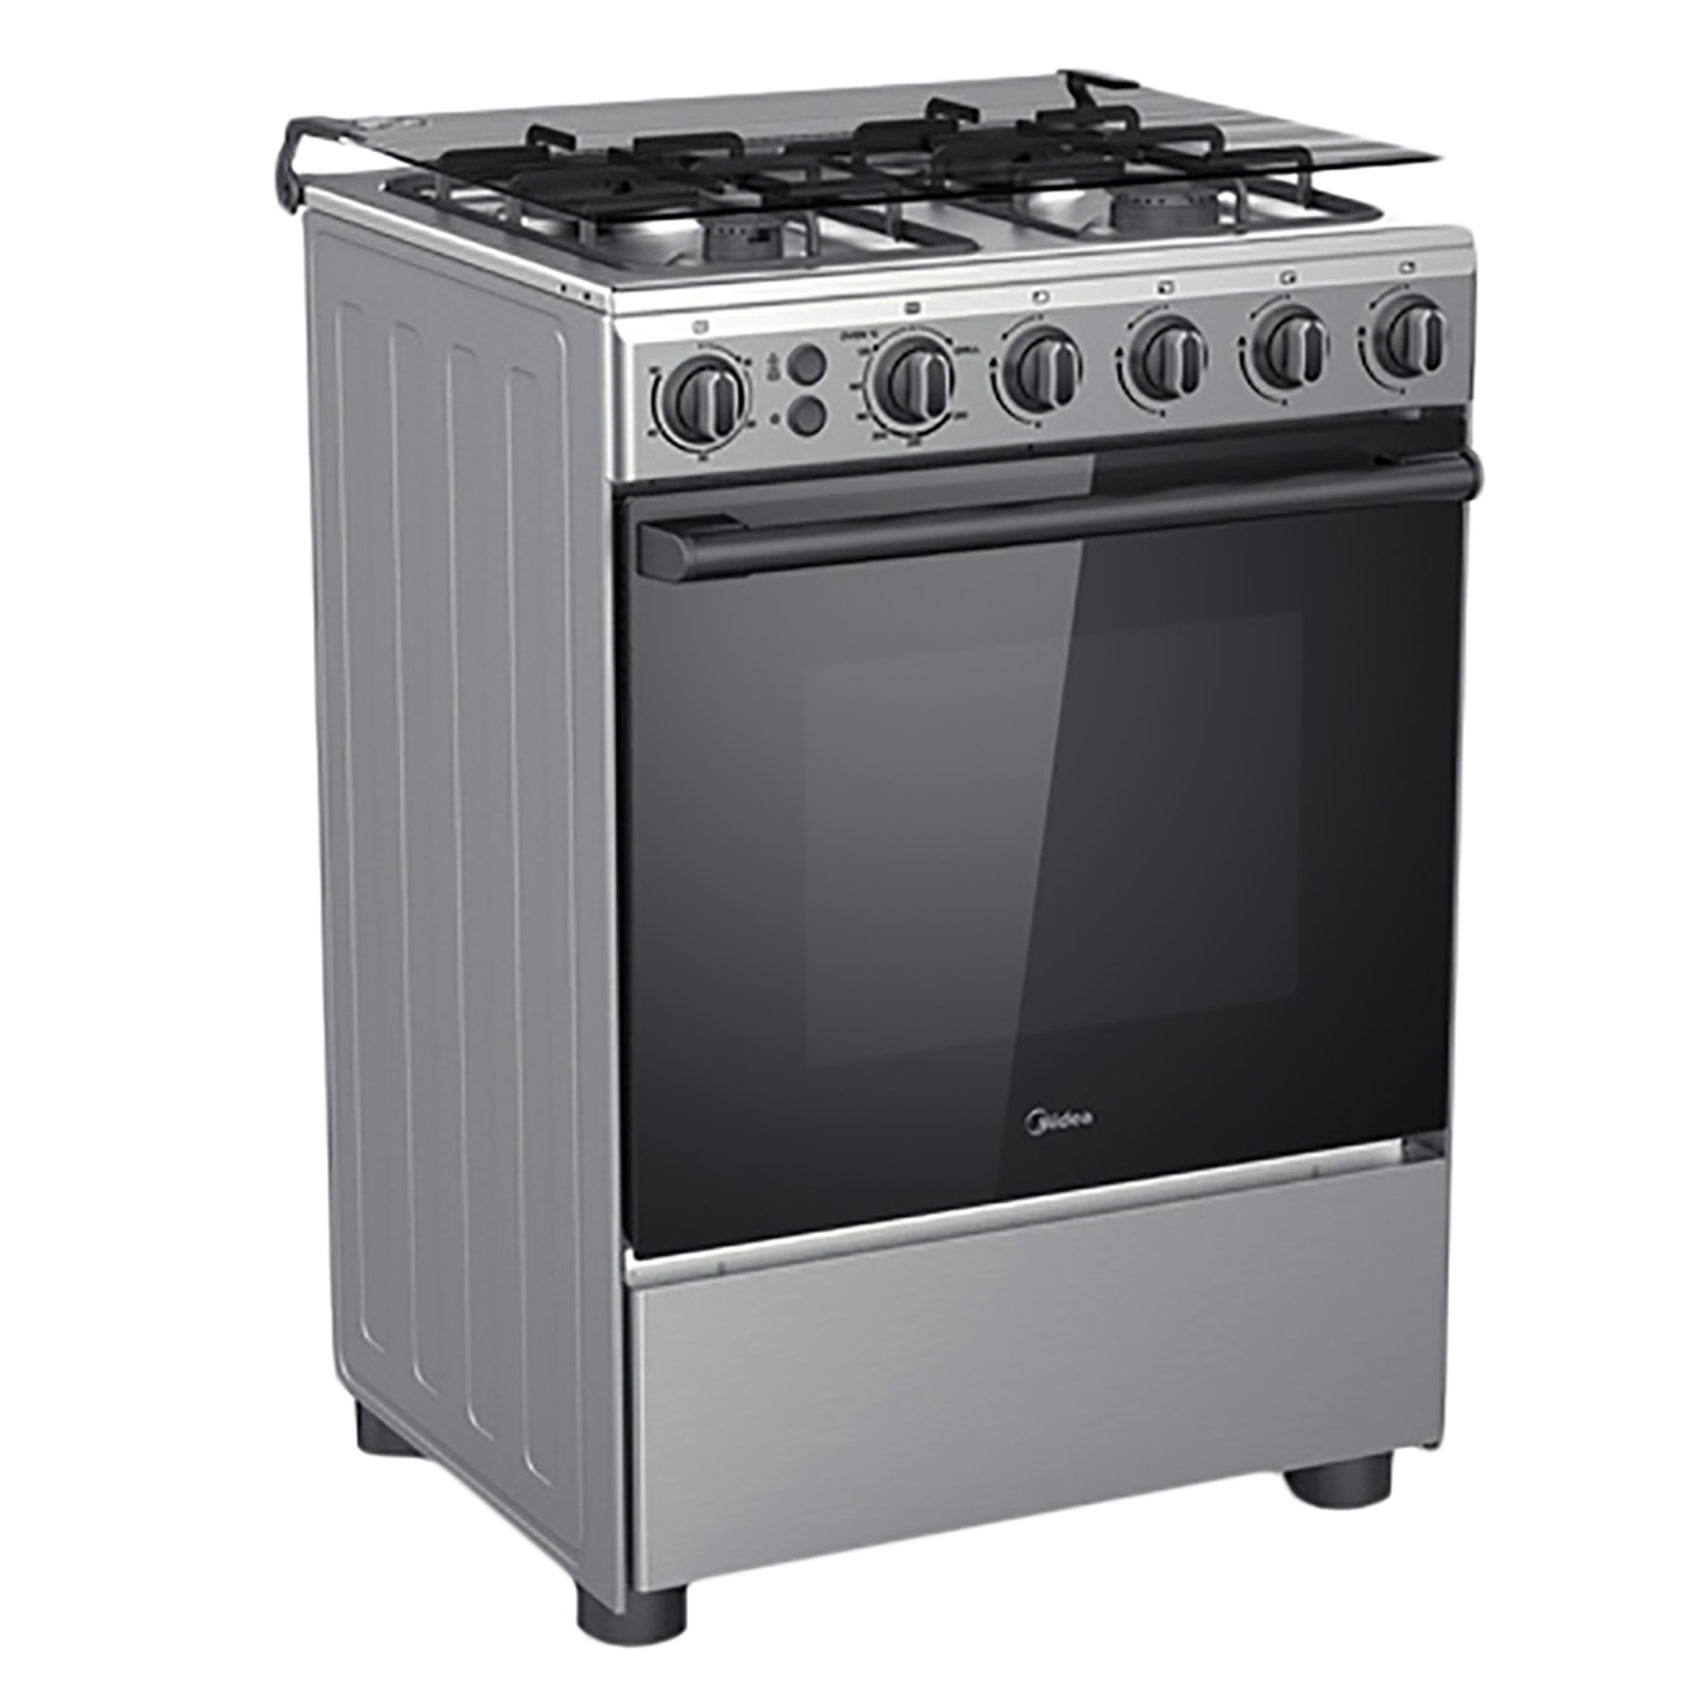 Midea Gas Cooker With Full Safety CME6060-D Silver/Black 60x60cm